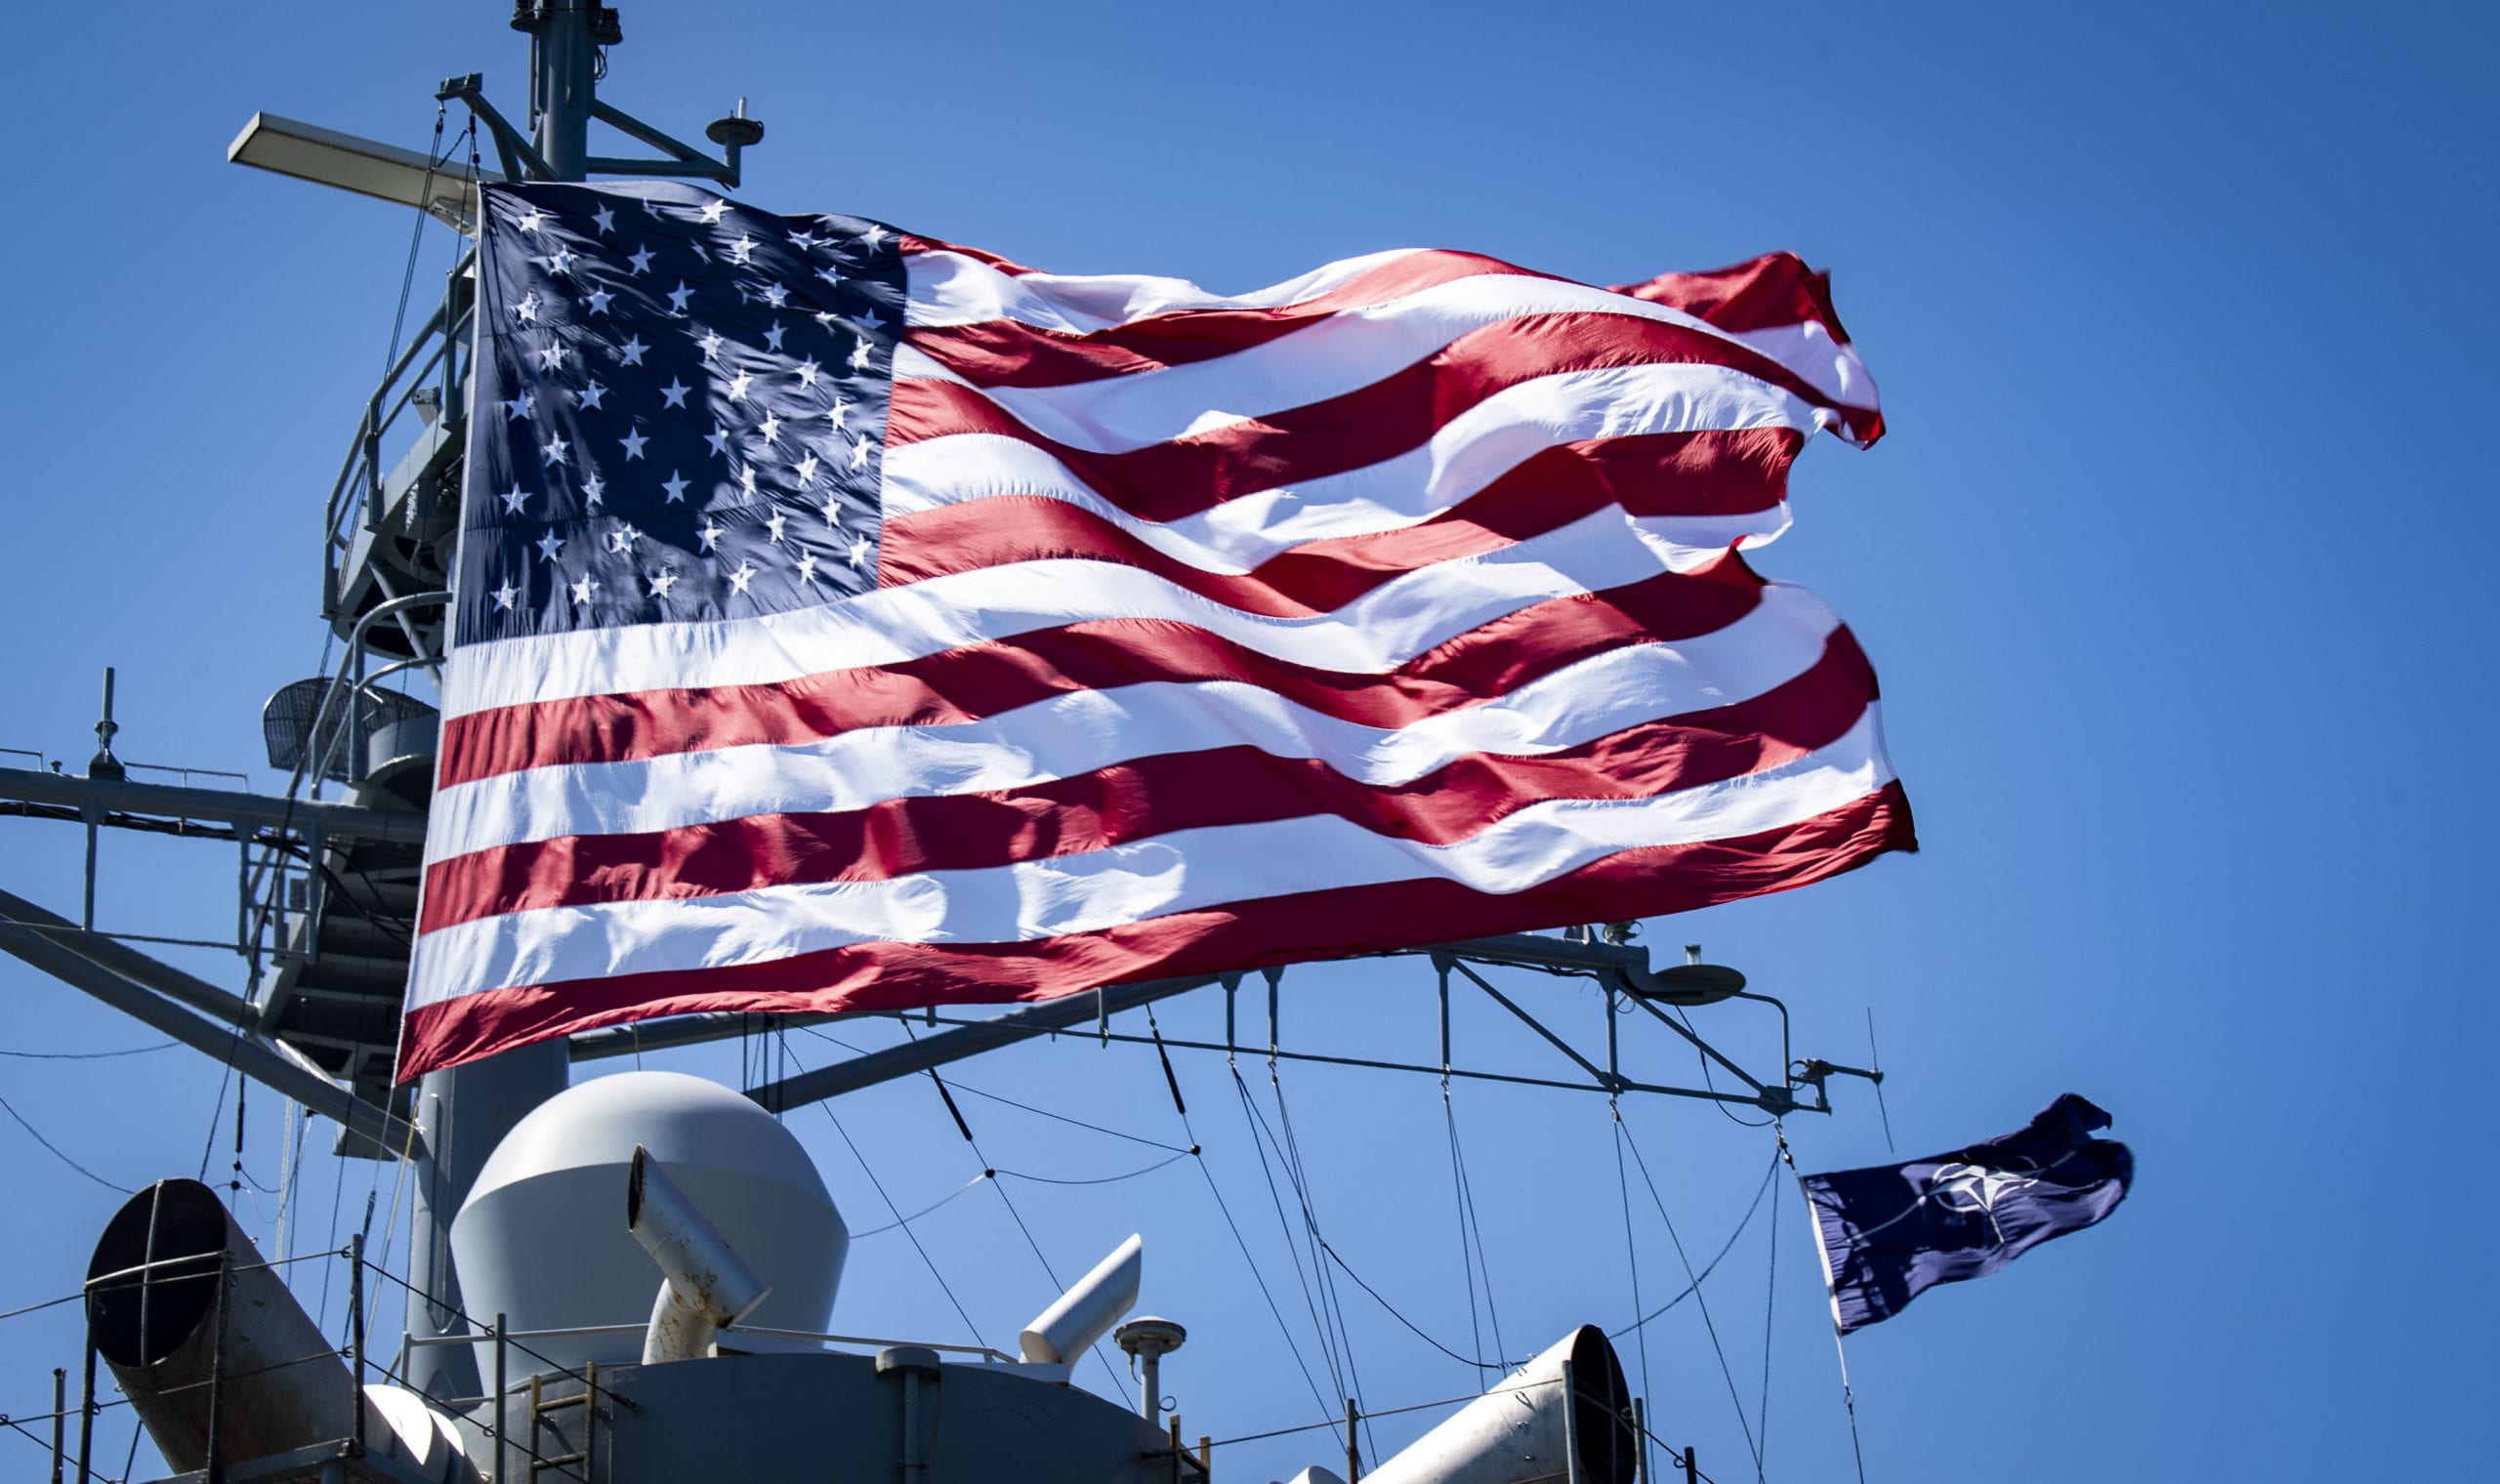 U.S. Navy to Bar Display of Confederate Flags